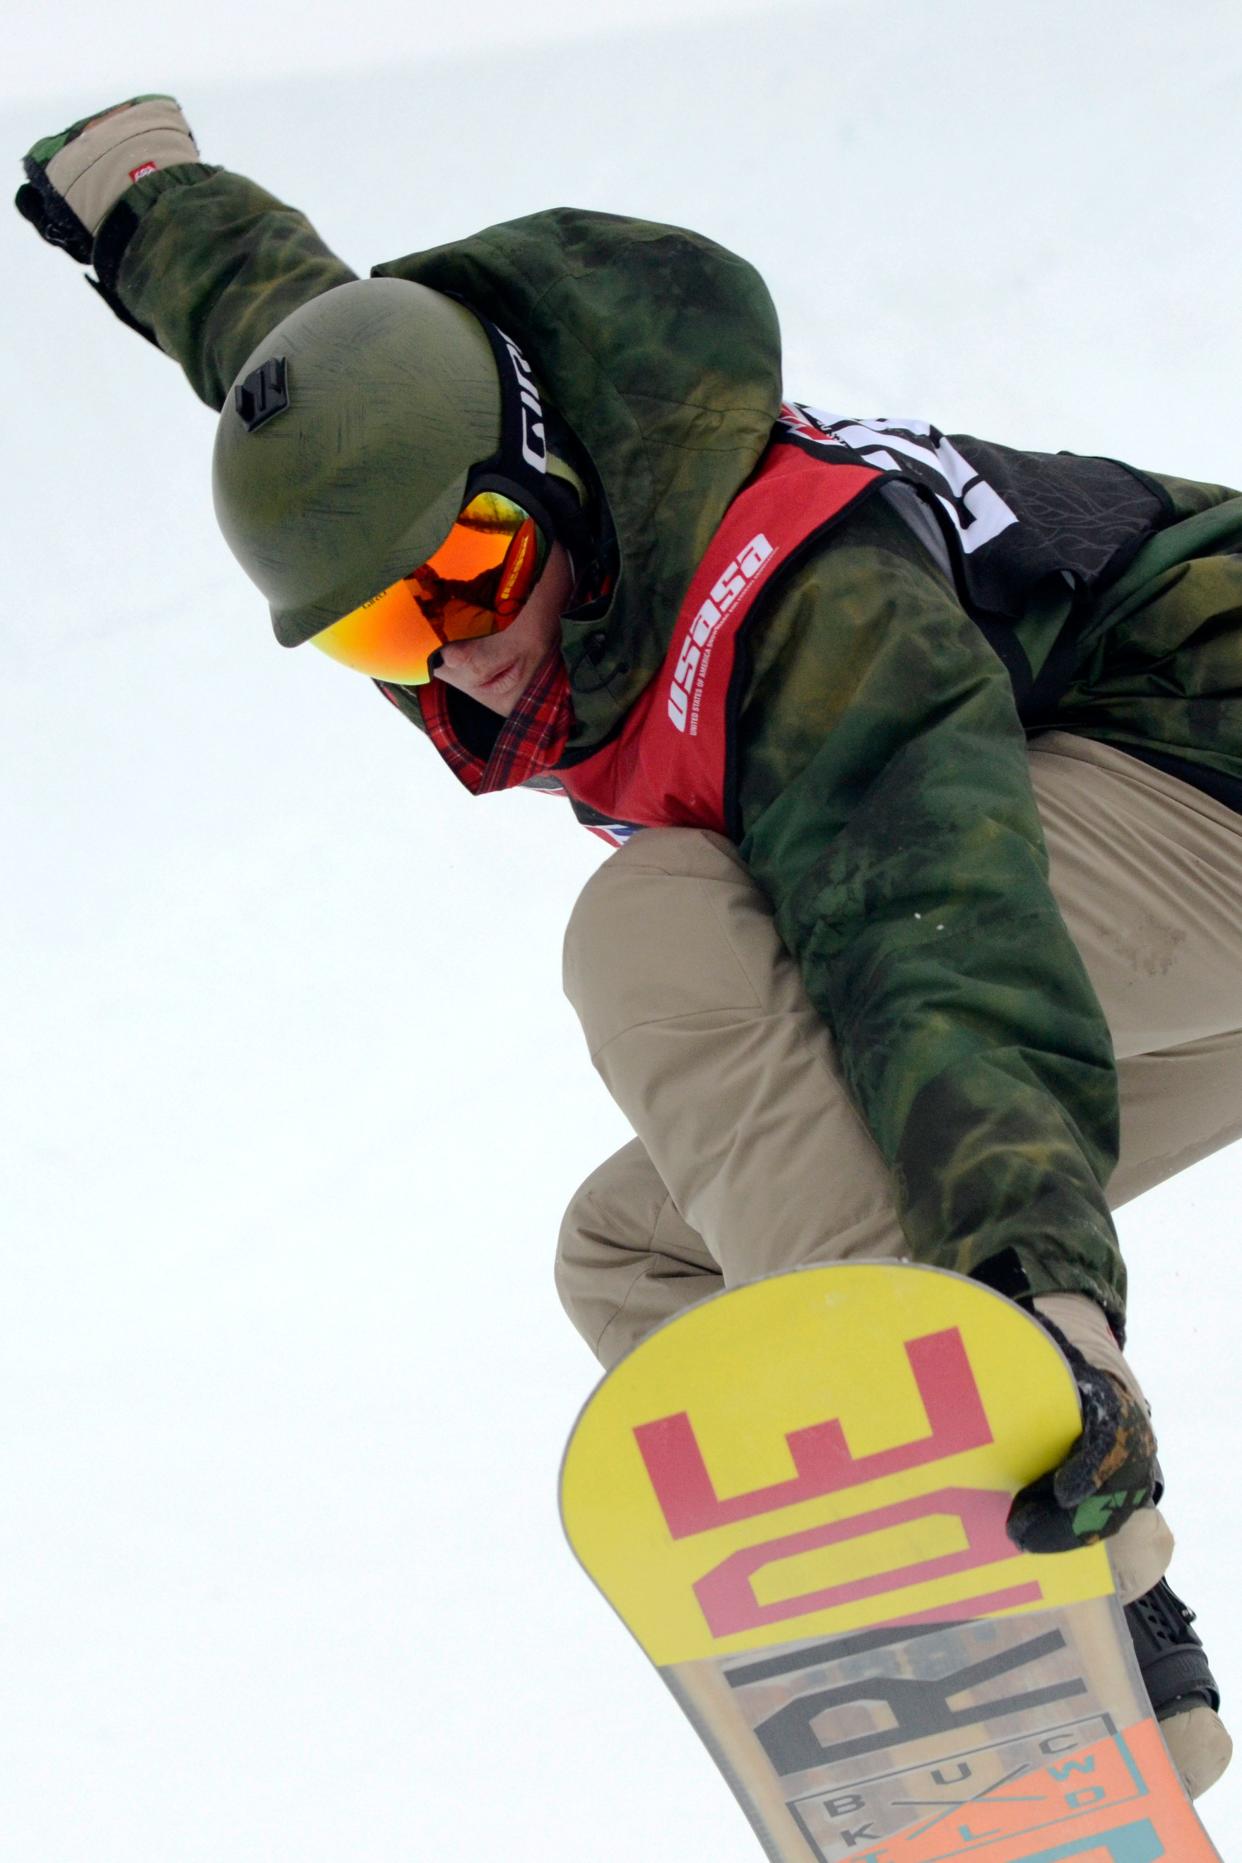 A snowboarder competes in a halfpipe competition at The Highlands near Harbor Springs.